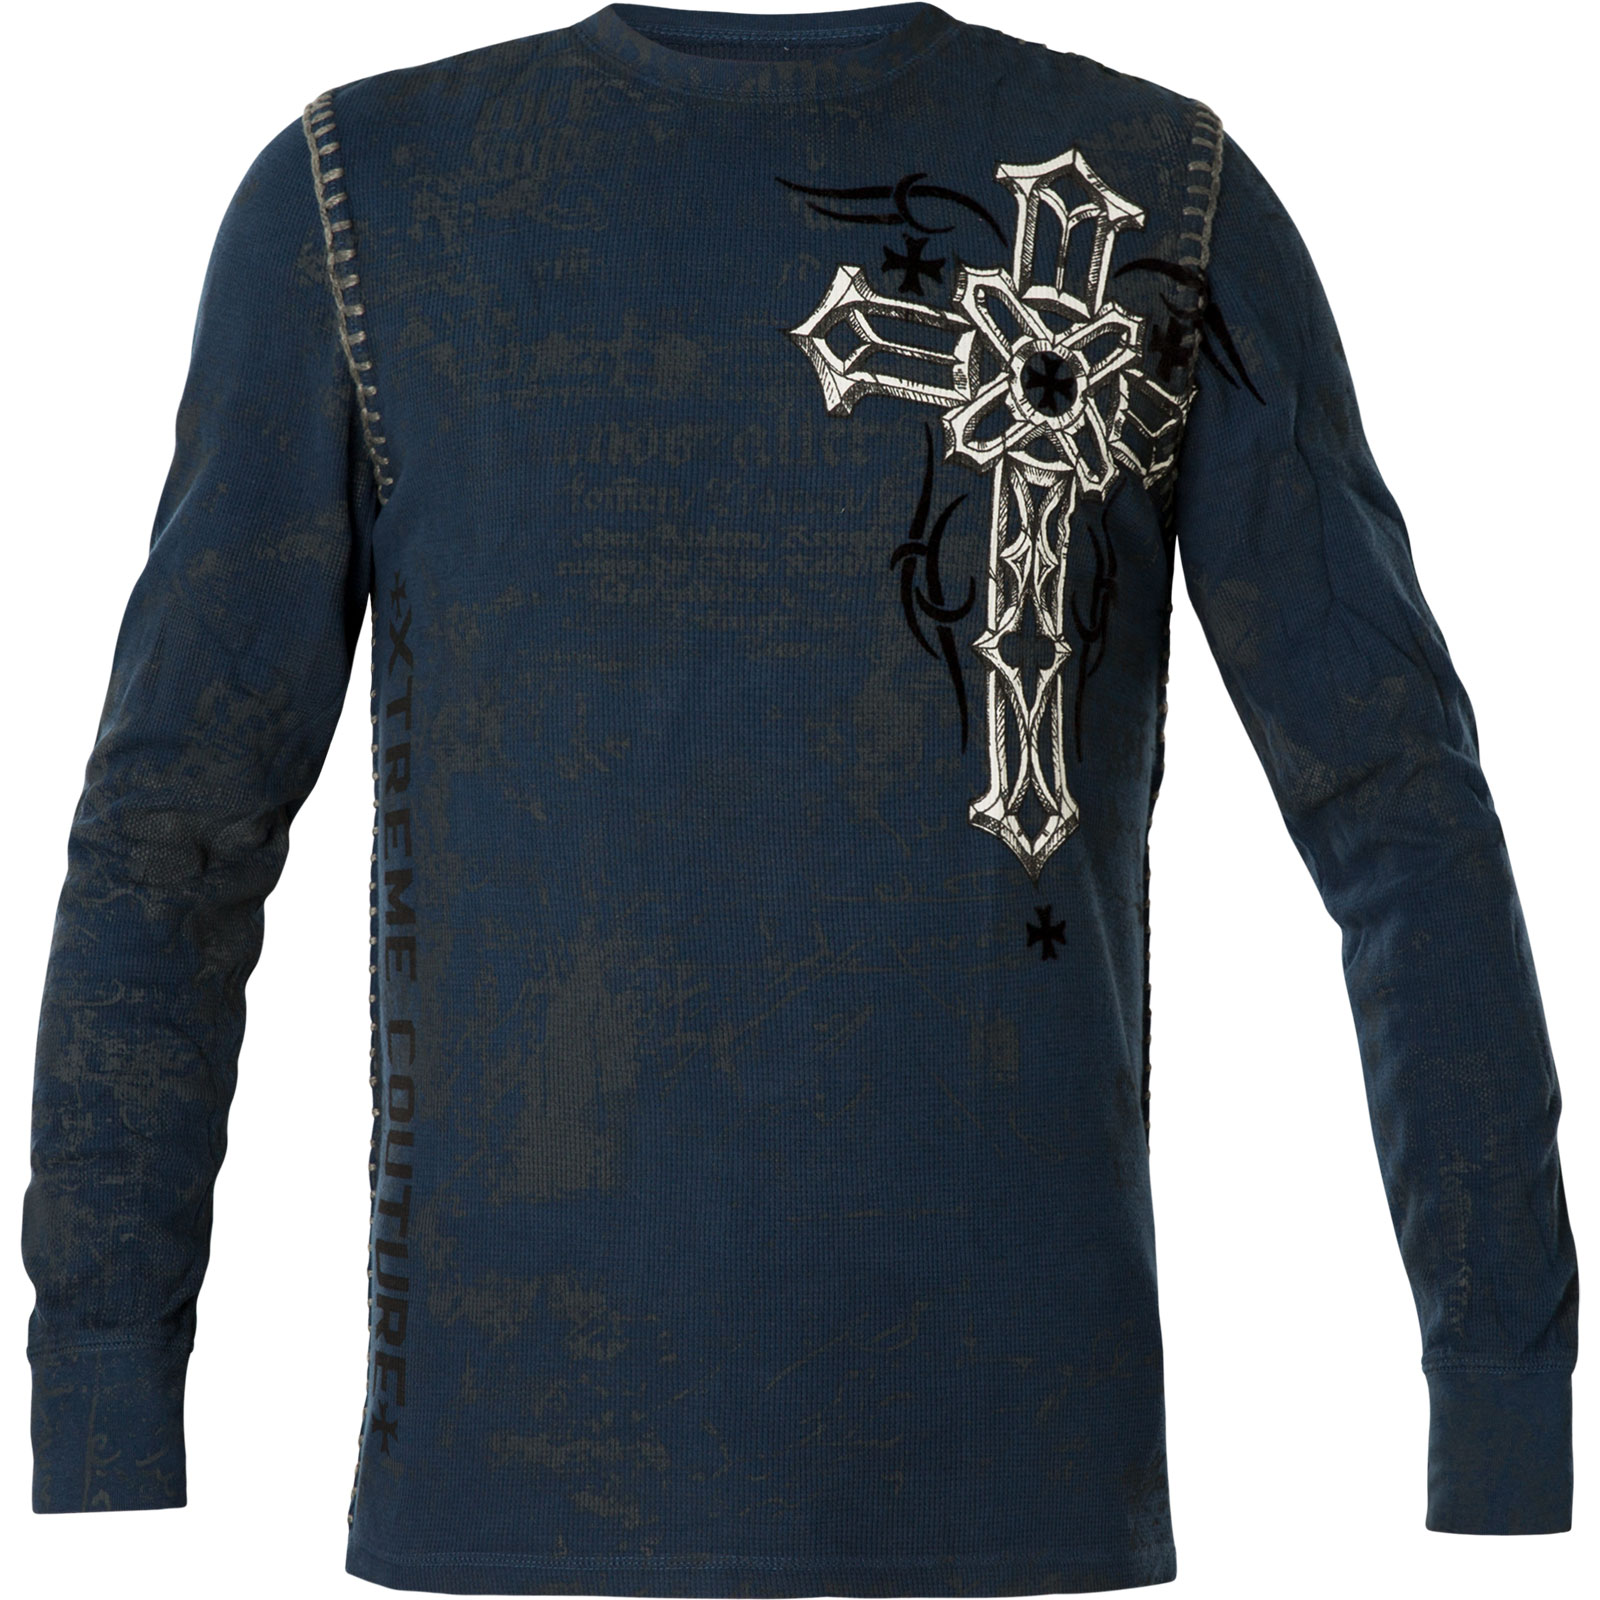 Xtreme Couture by Affliction Thermal Darker Side print with a cross and ...